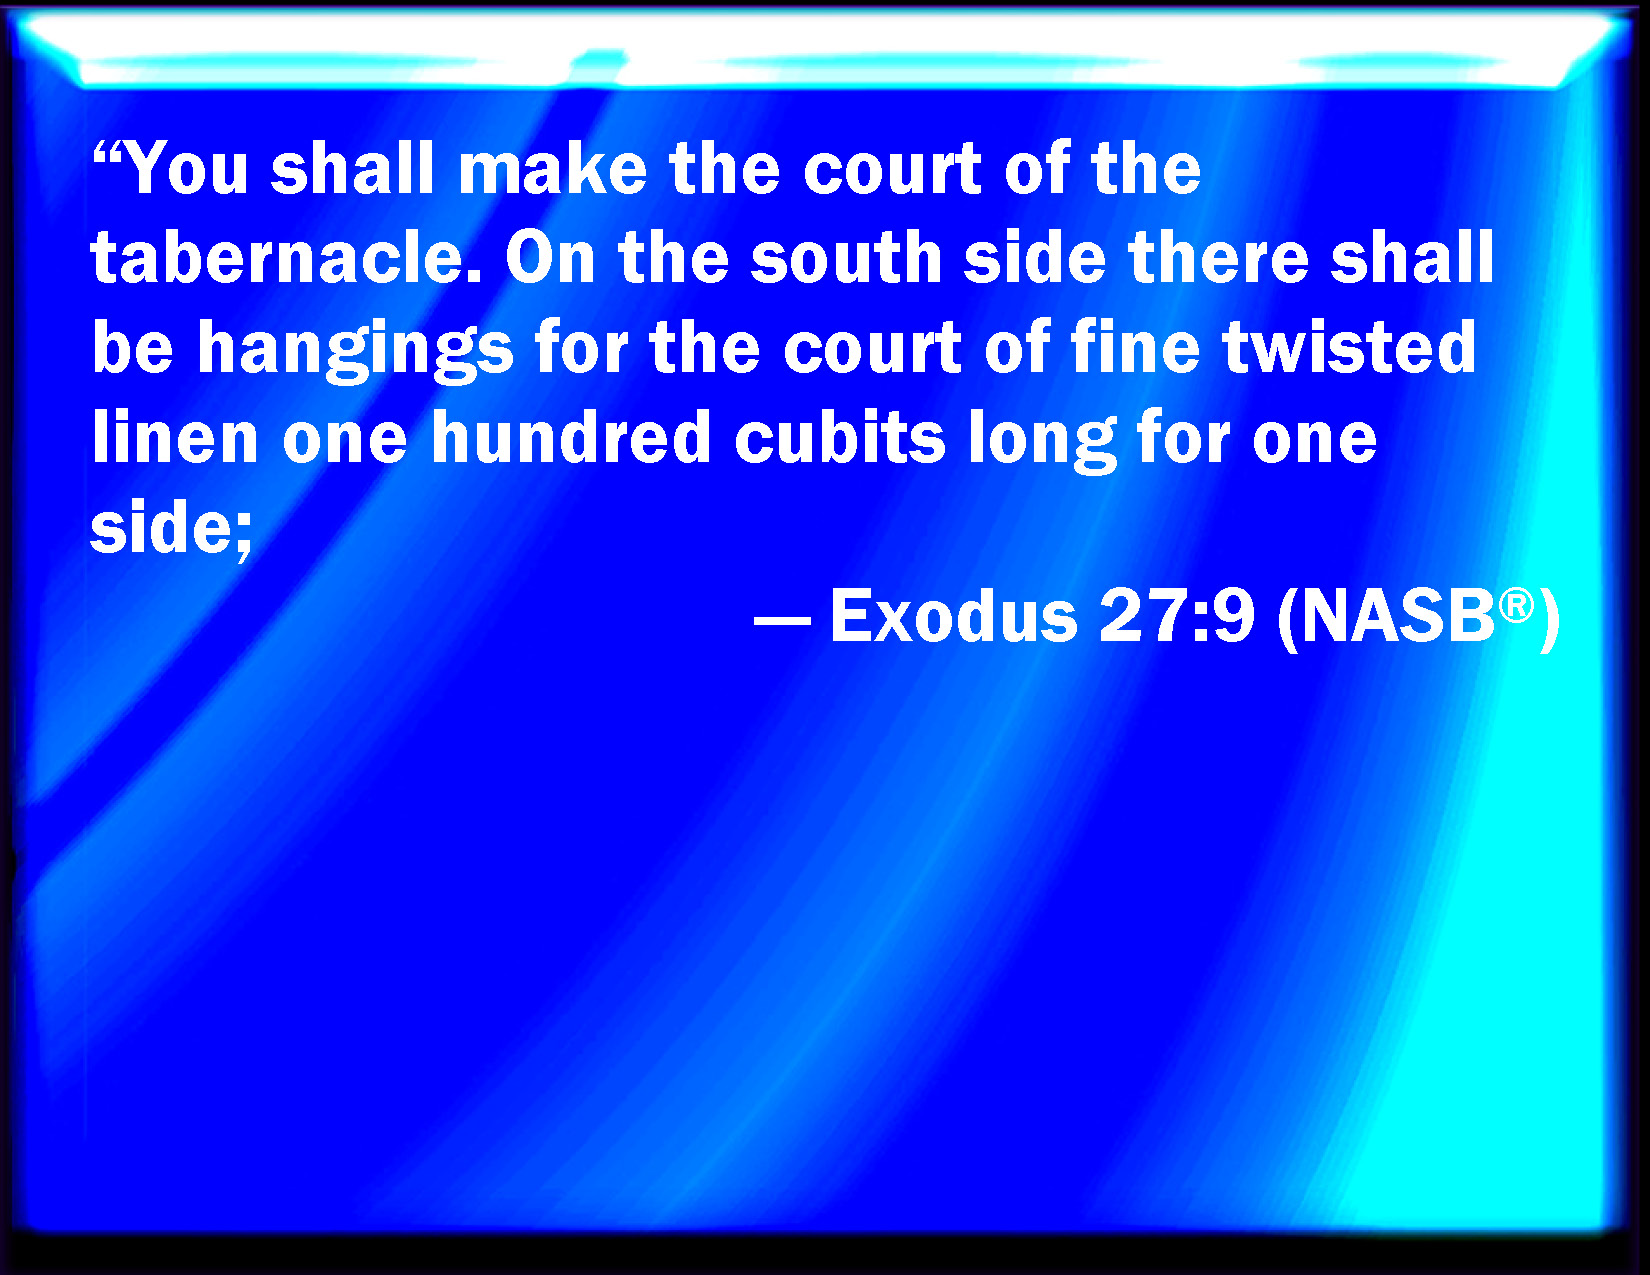 Exodus And You Shall Make The Court Of The Tabernacle For The South Side Southward There